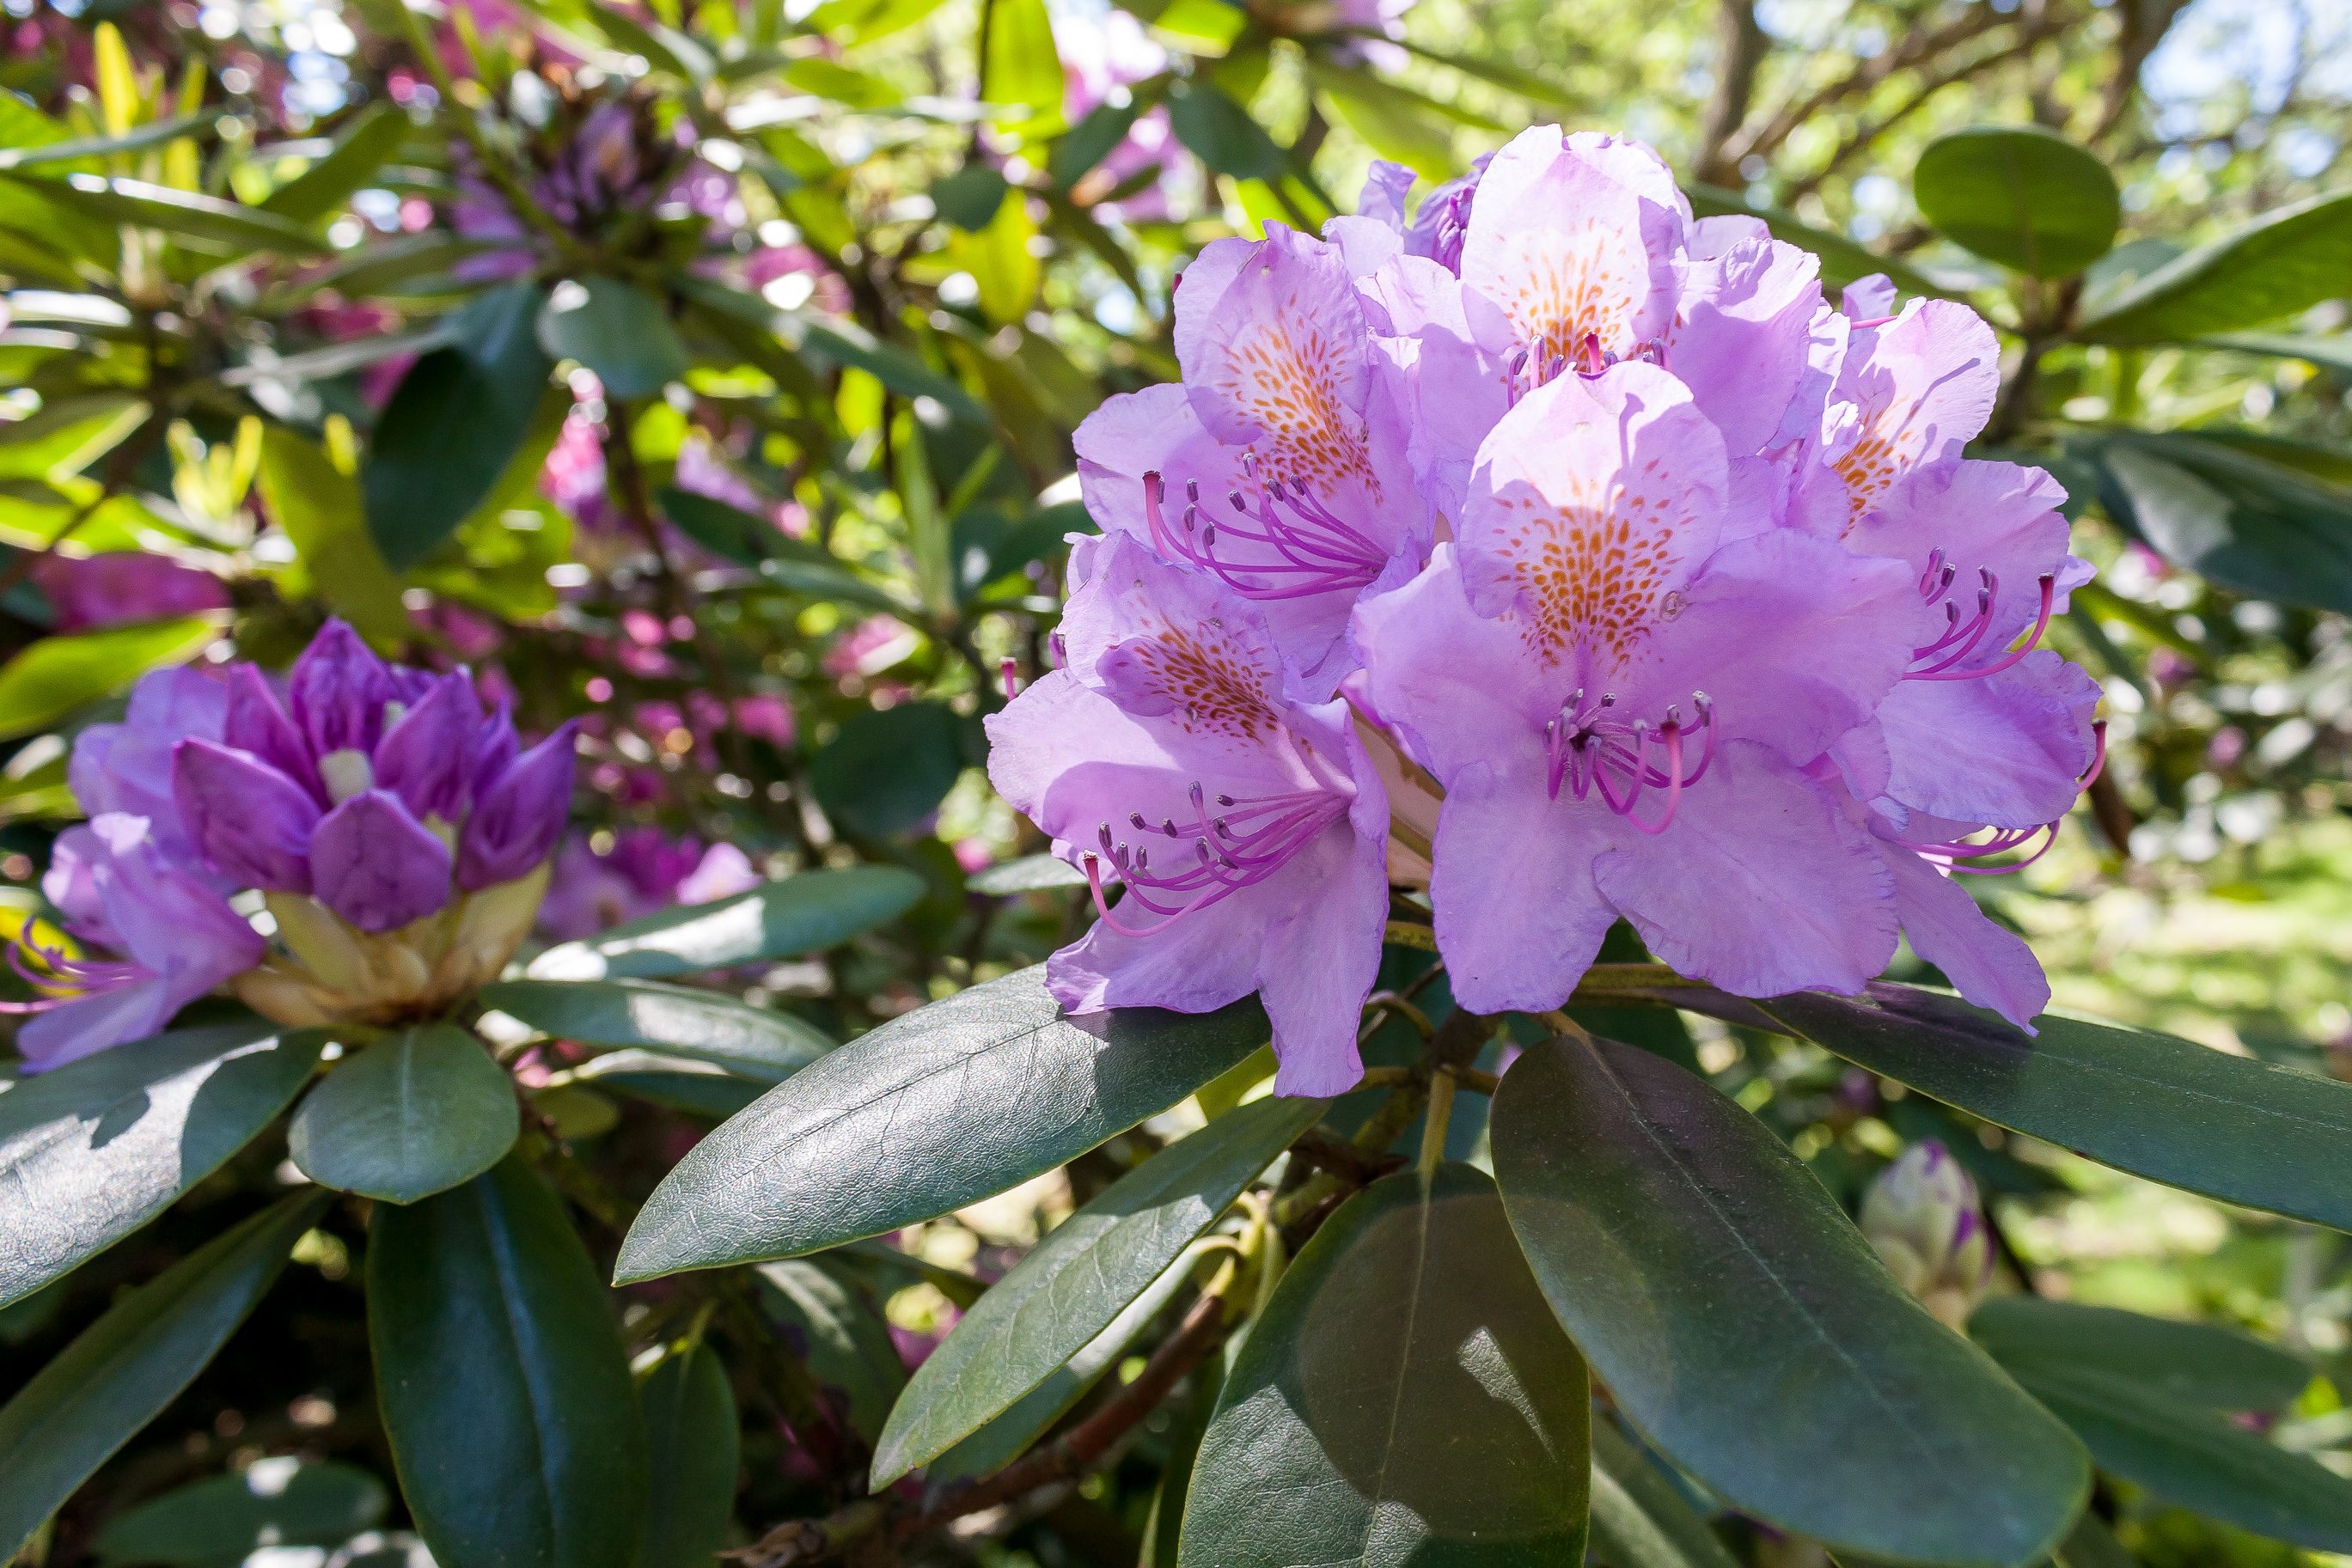 Rhododendrons bloom 